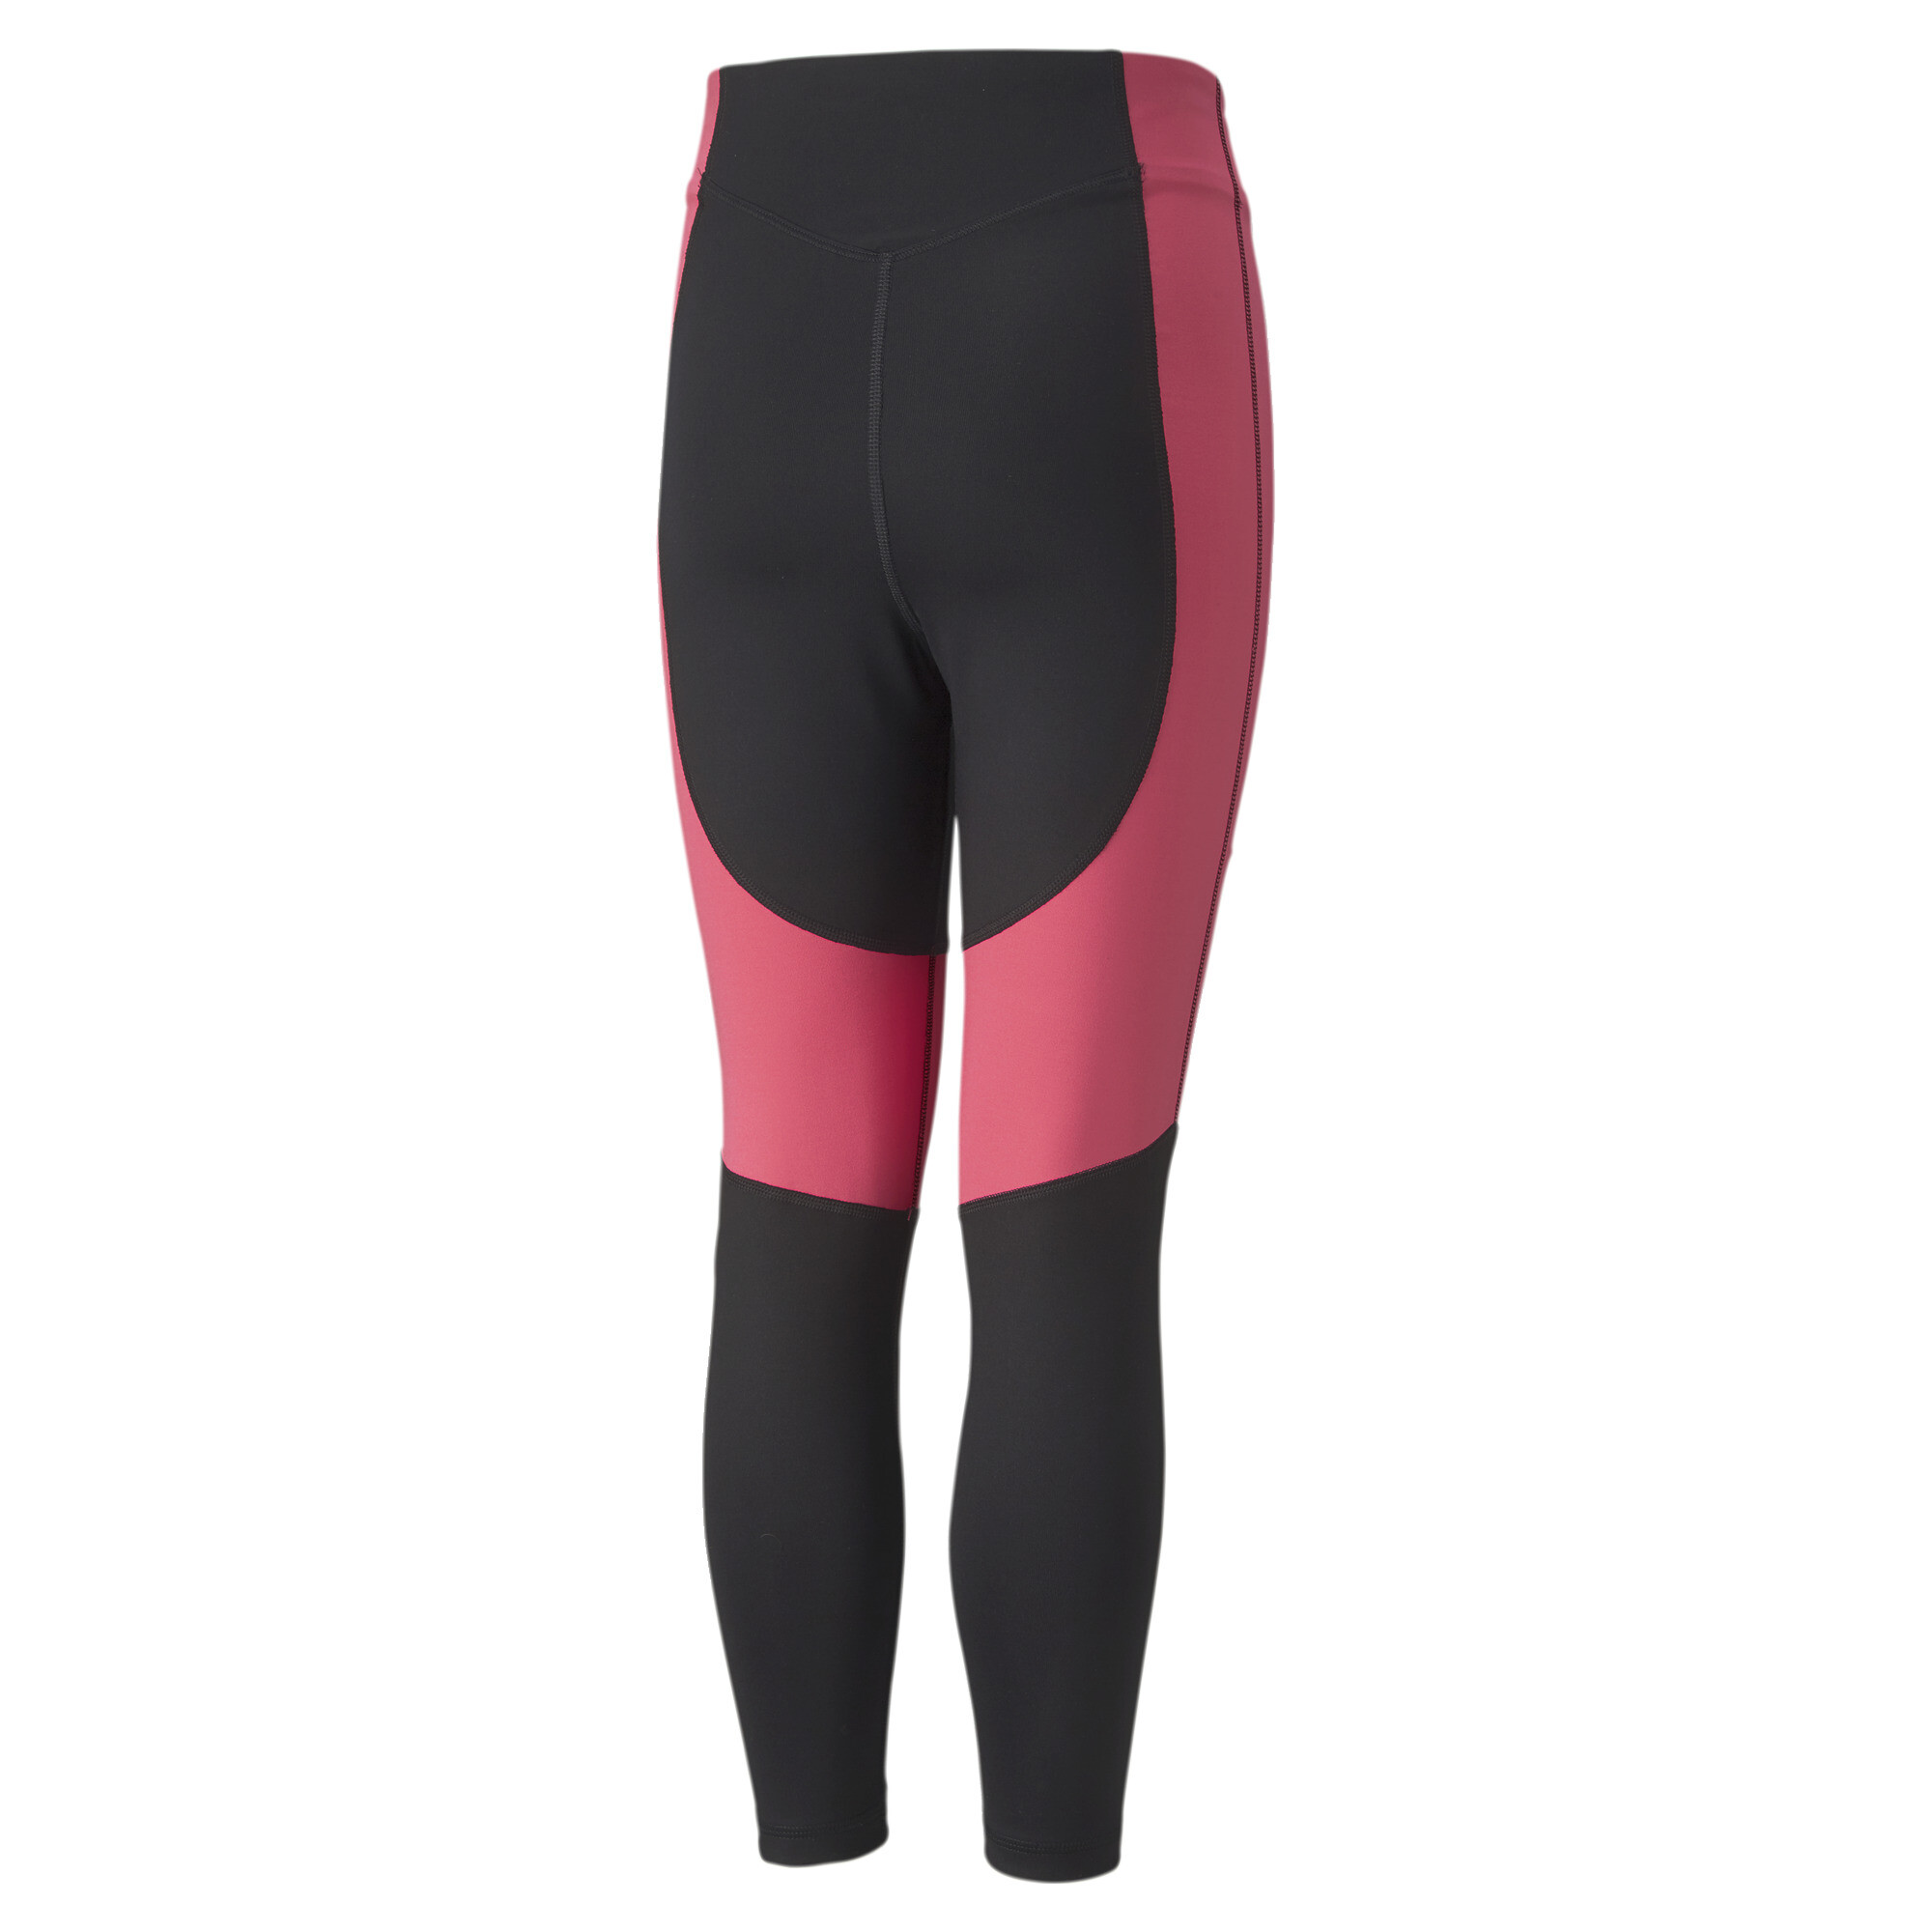 PUMA Favourites Logo High Waisted 7/8 Leggings In Pink, Size 15-16 Youth